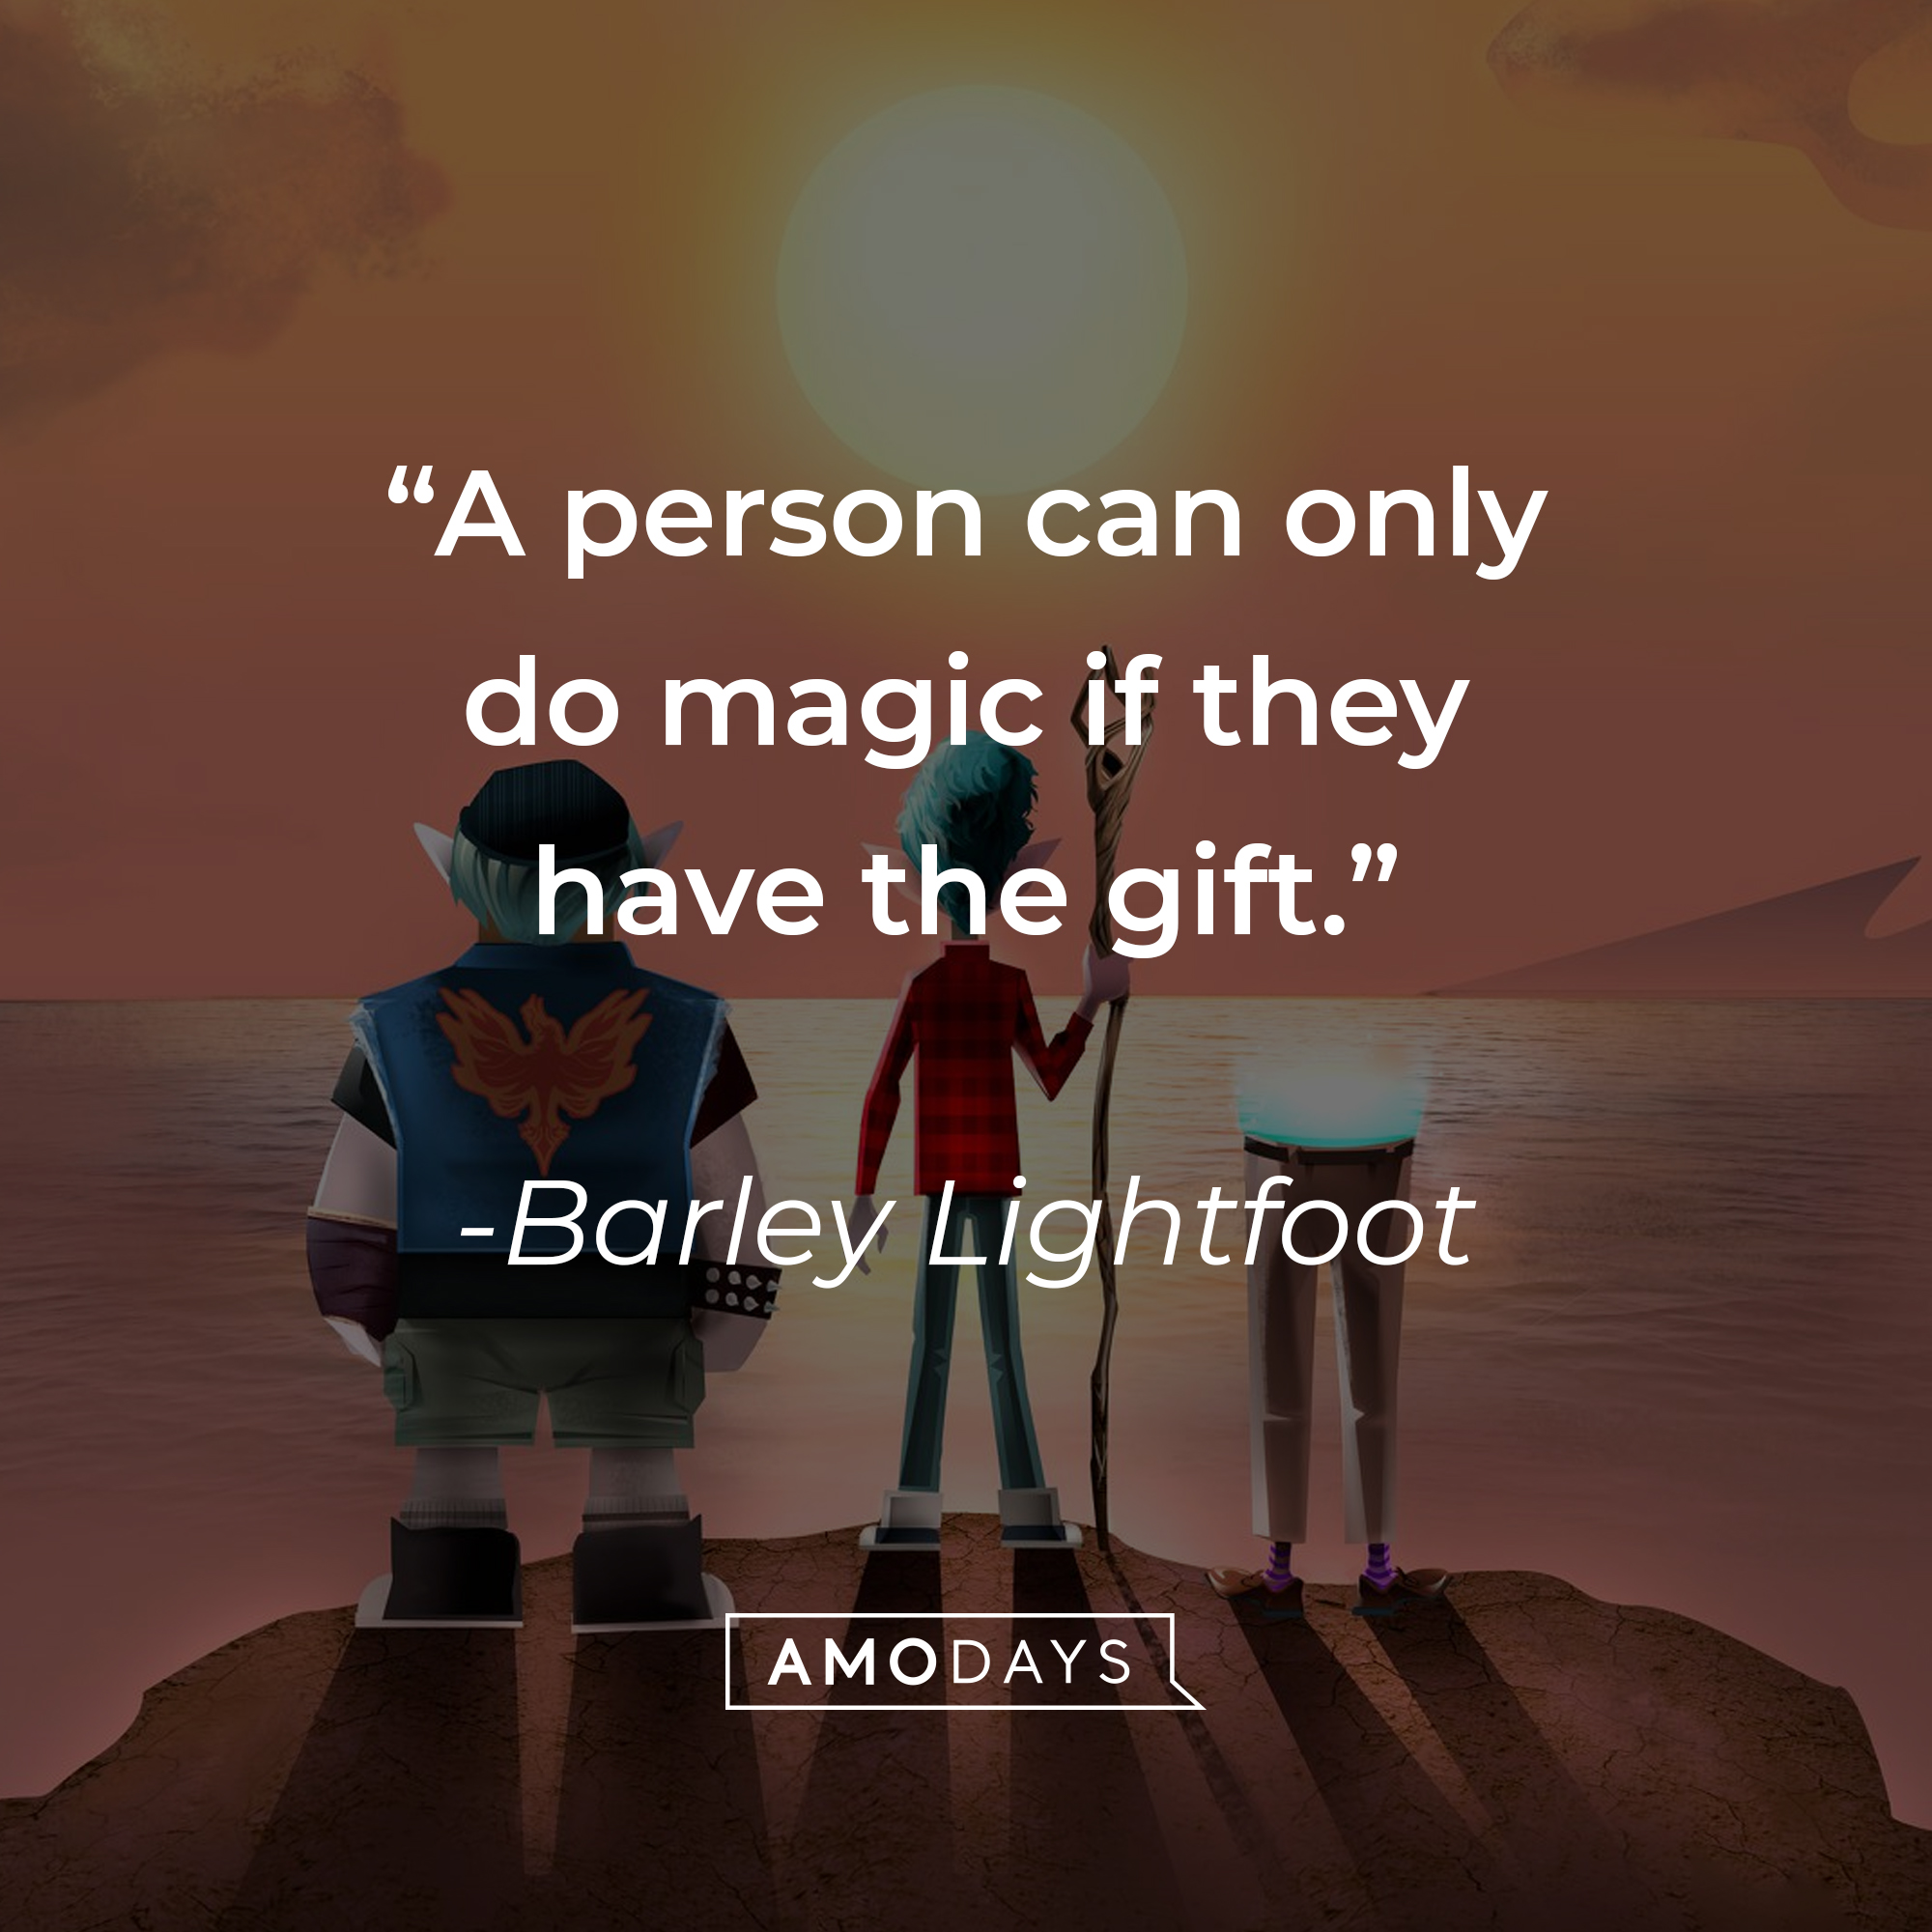 ̌A still from Disney's "Onward" with Barley Lightfoot's quote: "A person can only do magic if they have the gift." | Source: facebook.com/pixaronward